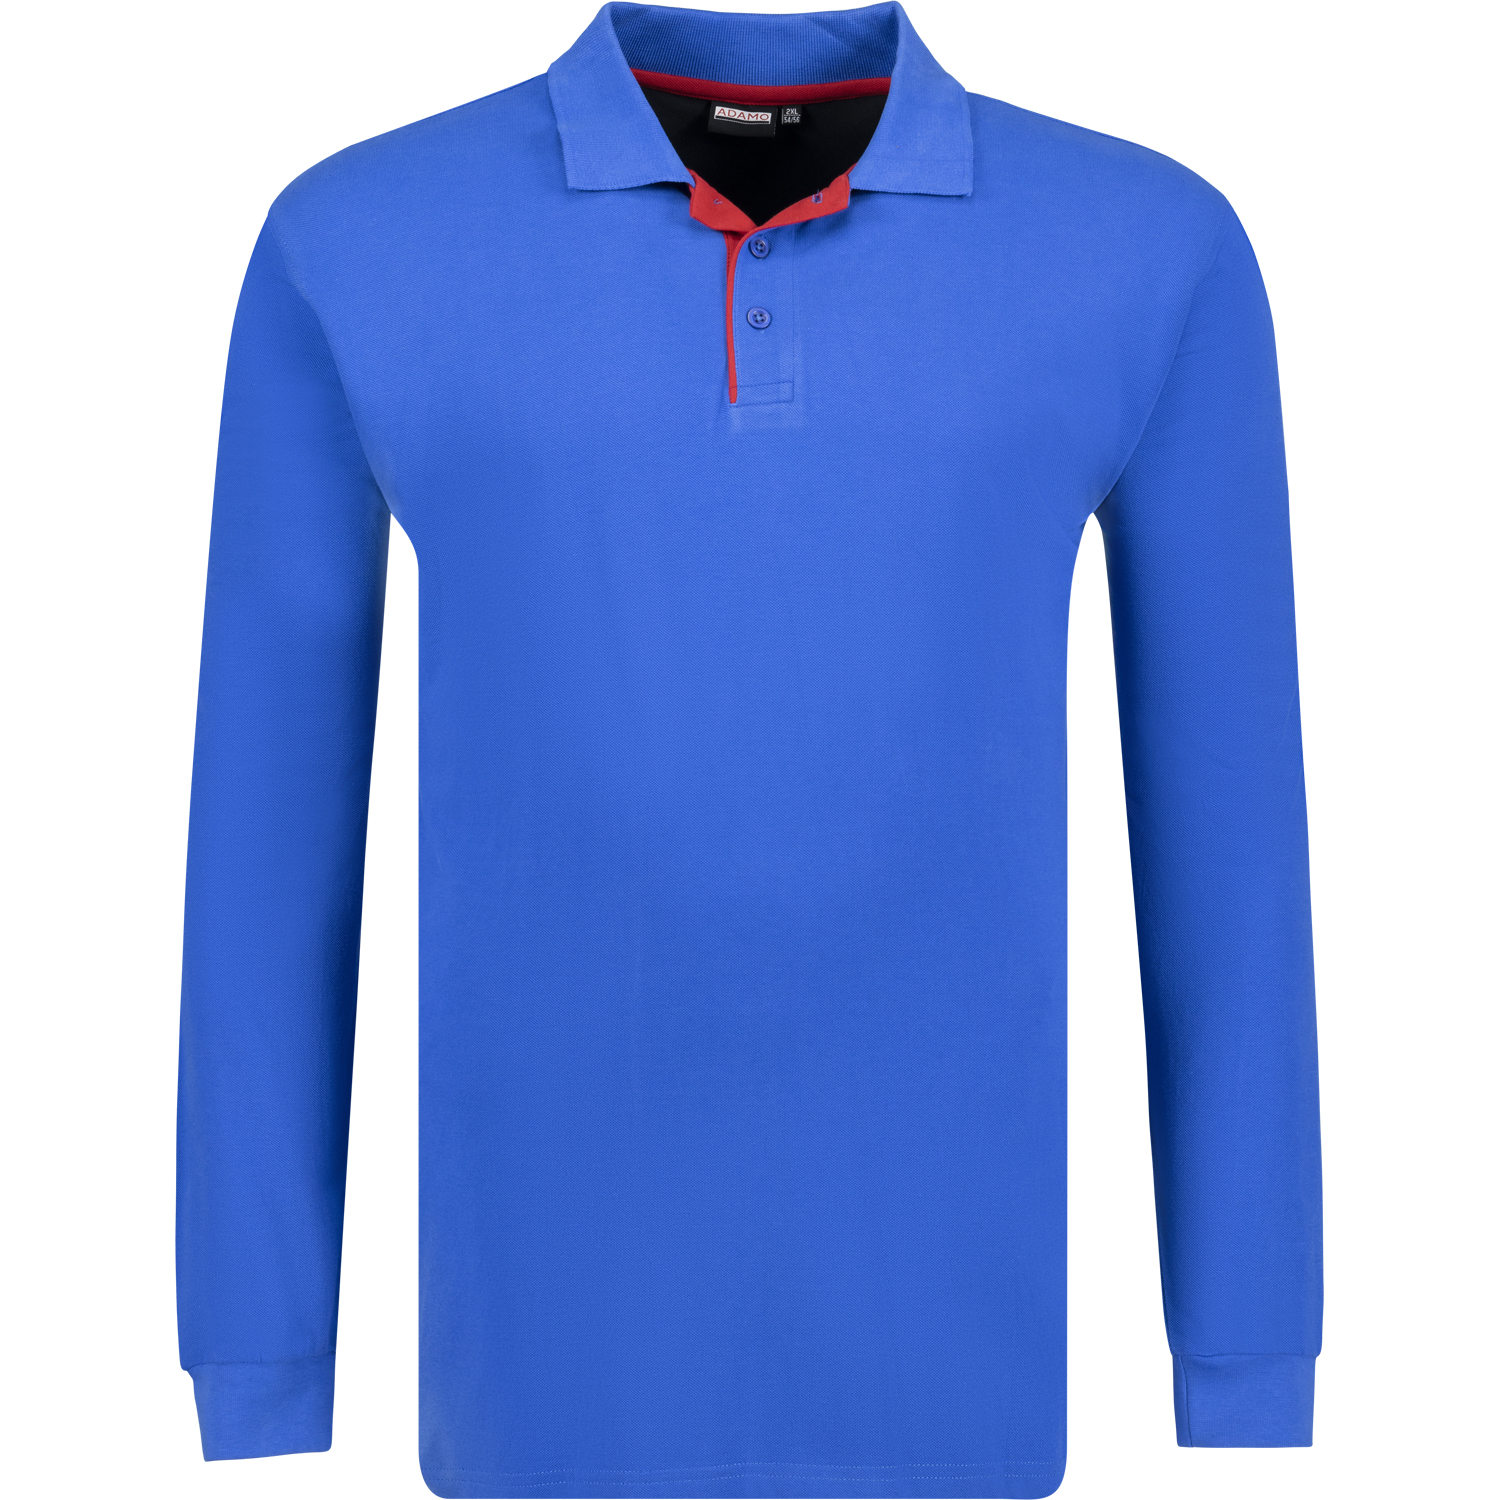 Mens Pique Poloshirt longsleeve COMFORT FIT Serie Peter from Adamo in big sizes XXL to 12XL